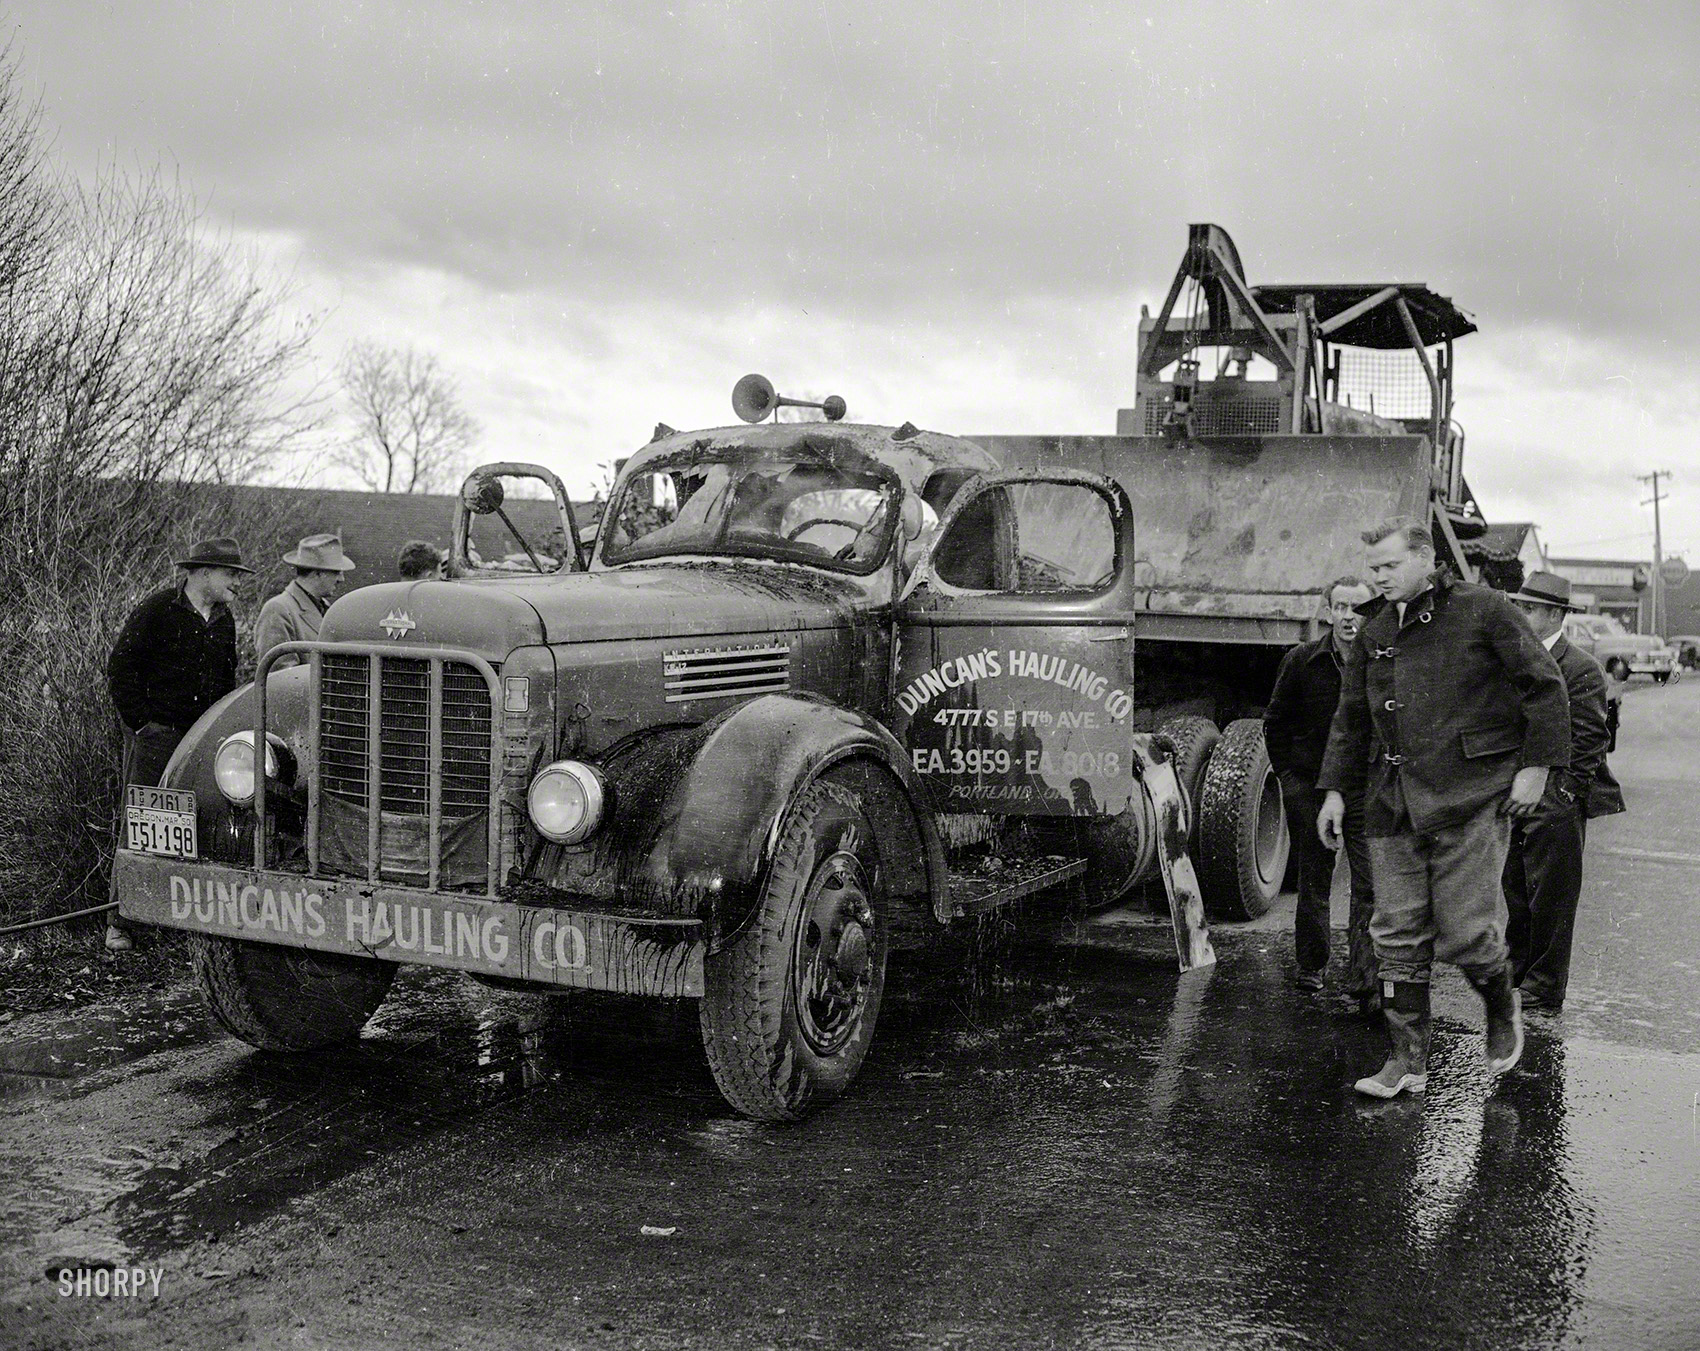 "Truck fire." A burned-out, watered-down International somewhere in Oregon. 4x5 inch acetate negative from the Shorpy News Photo Archive. View full size.